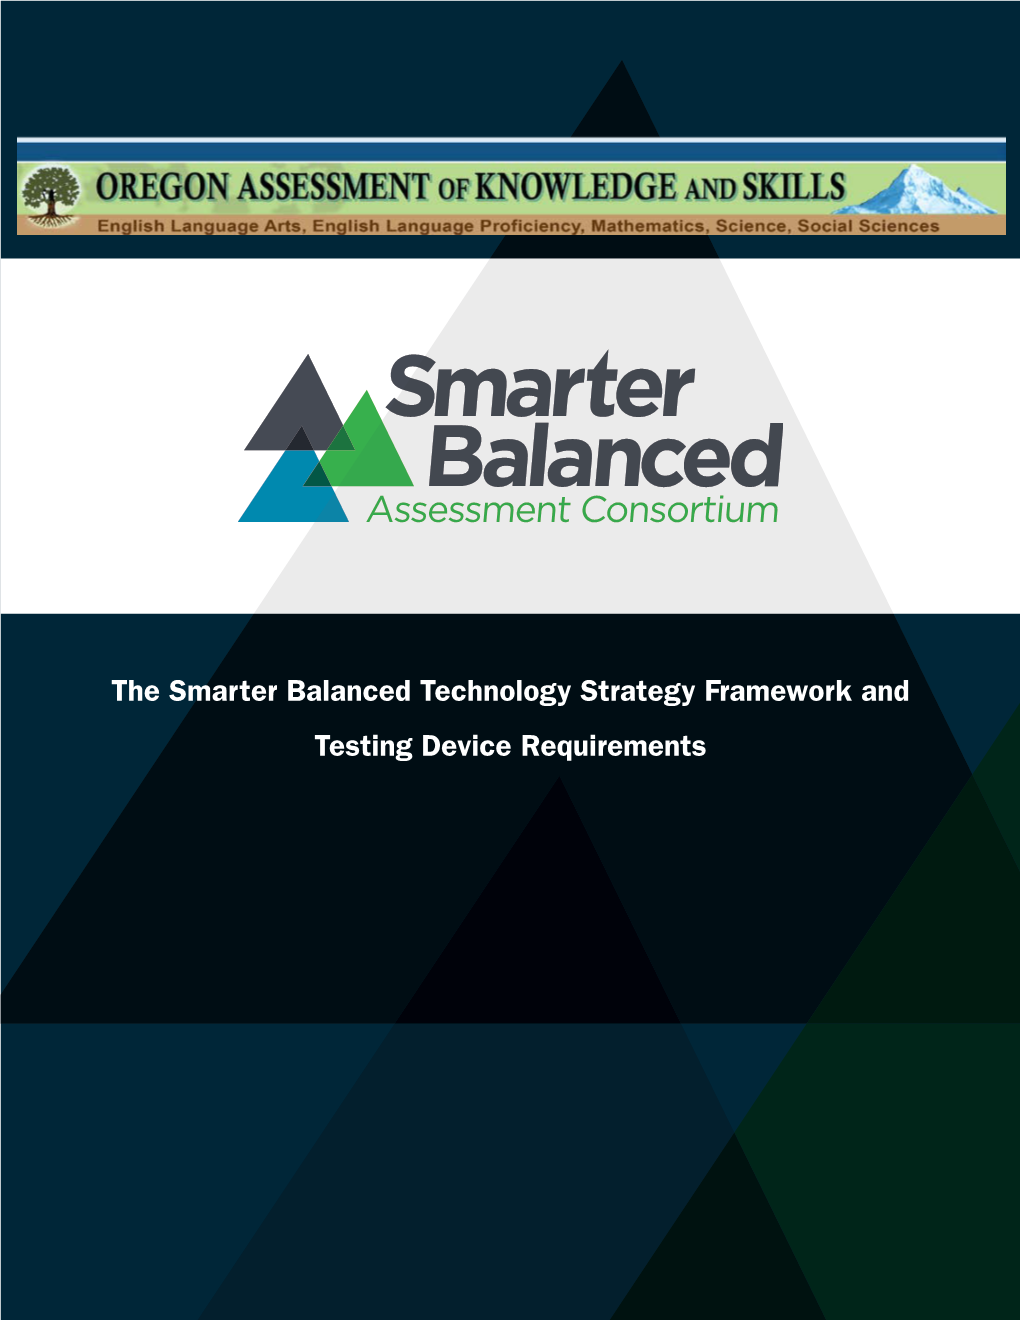 Smarter Balanced Technology Strategy Framework and Testing Device Requirements